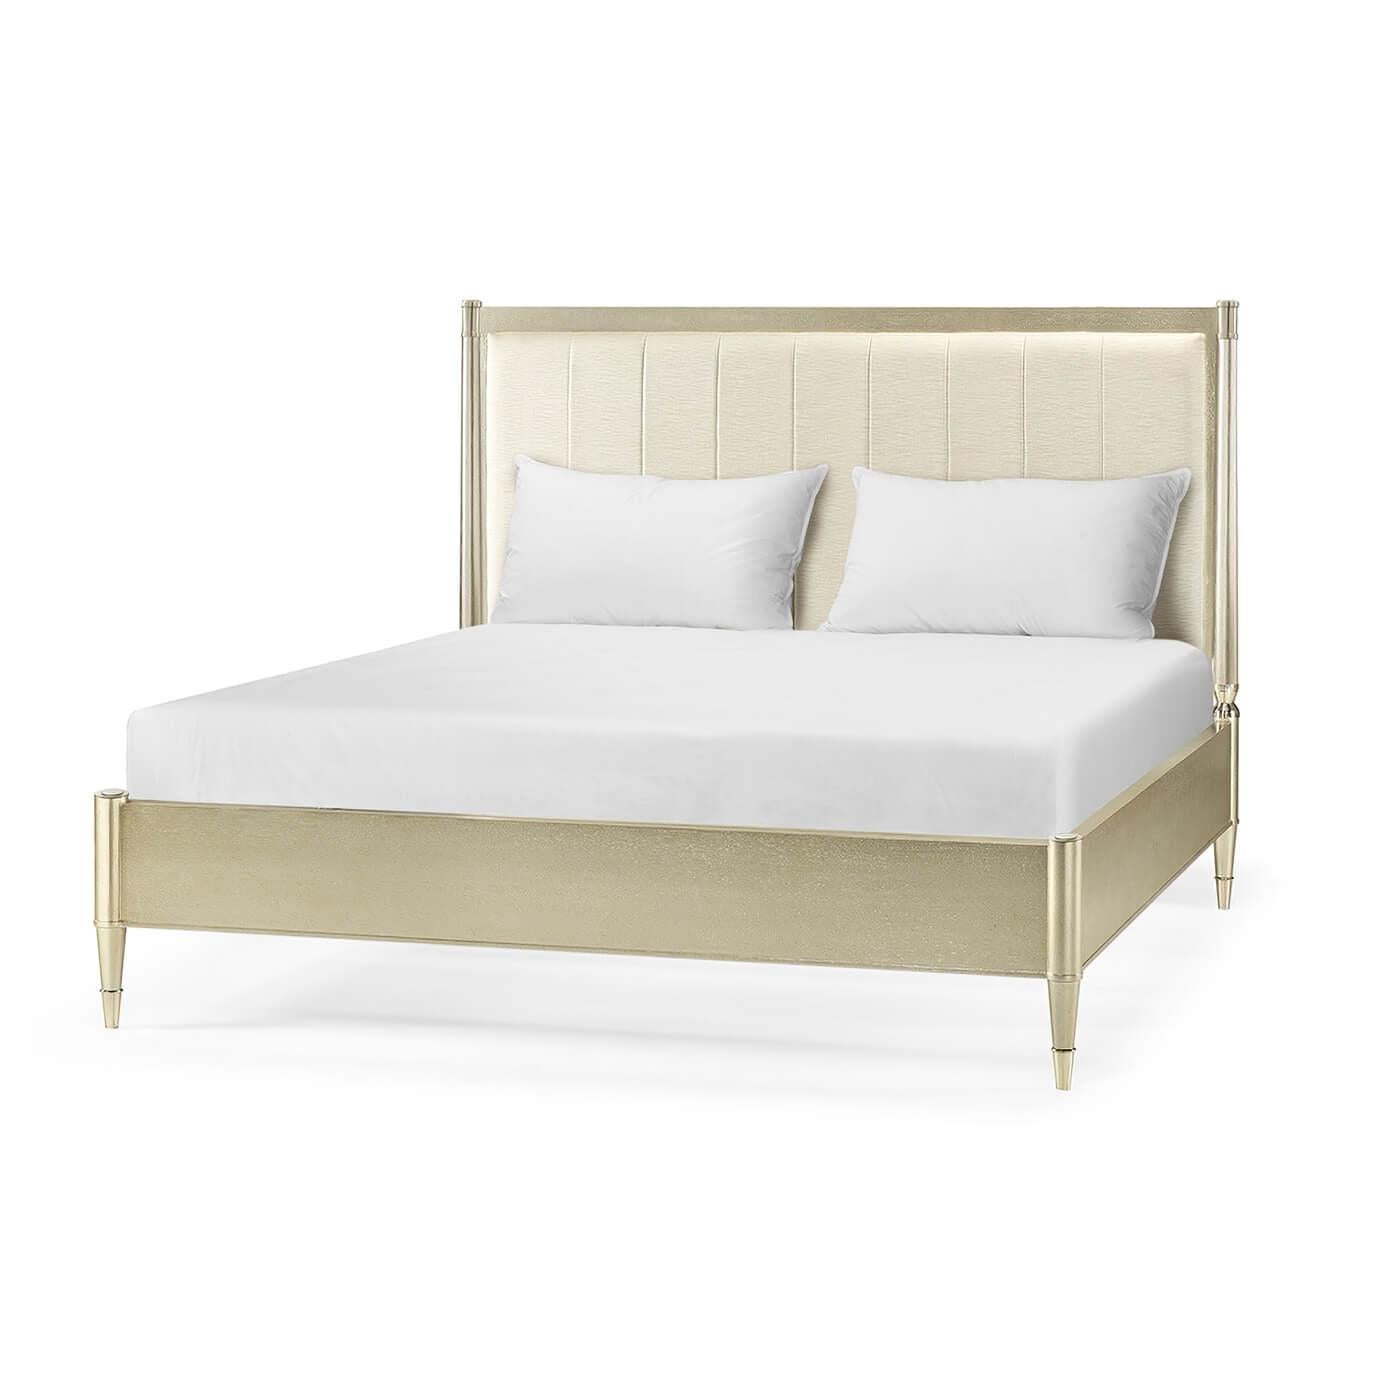 Mid century silvered canopy king size bed with an upholstered headboard and stainless steel and metal frame.

Dimensions: 82 1/4